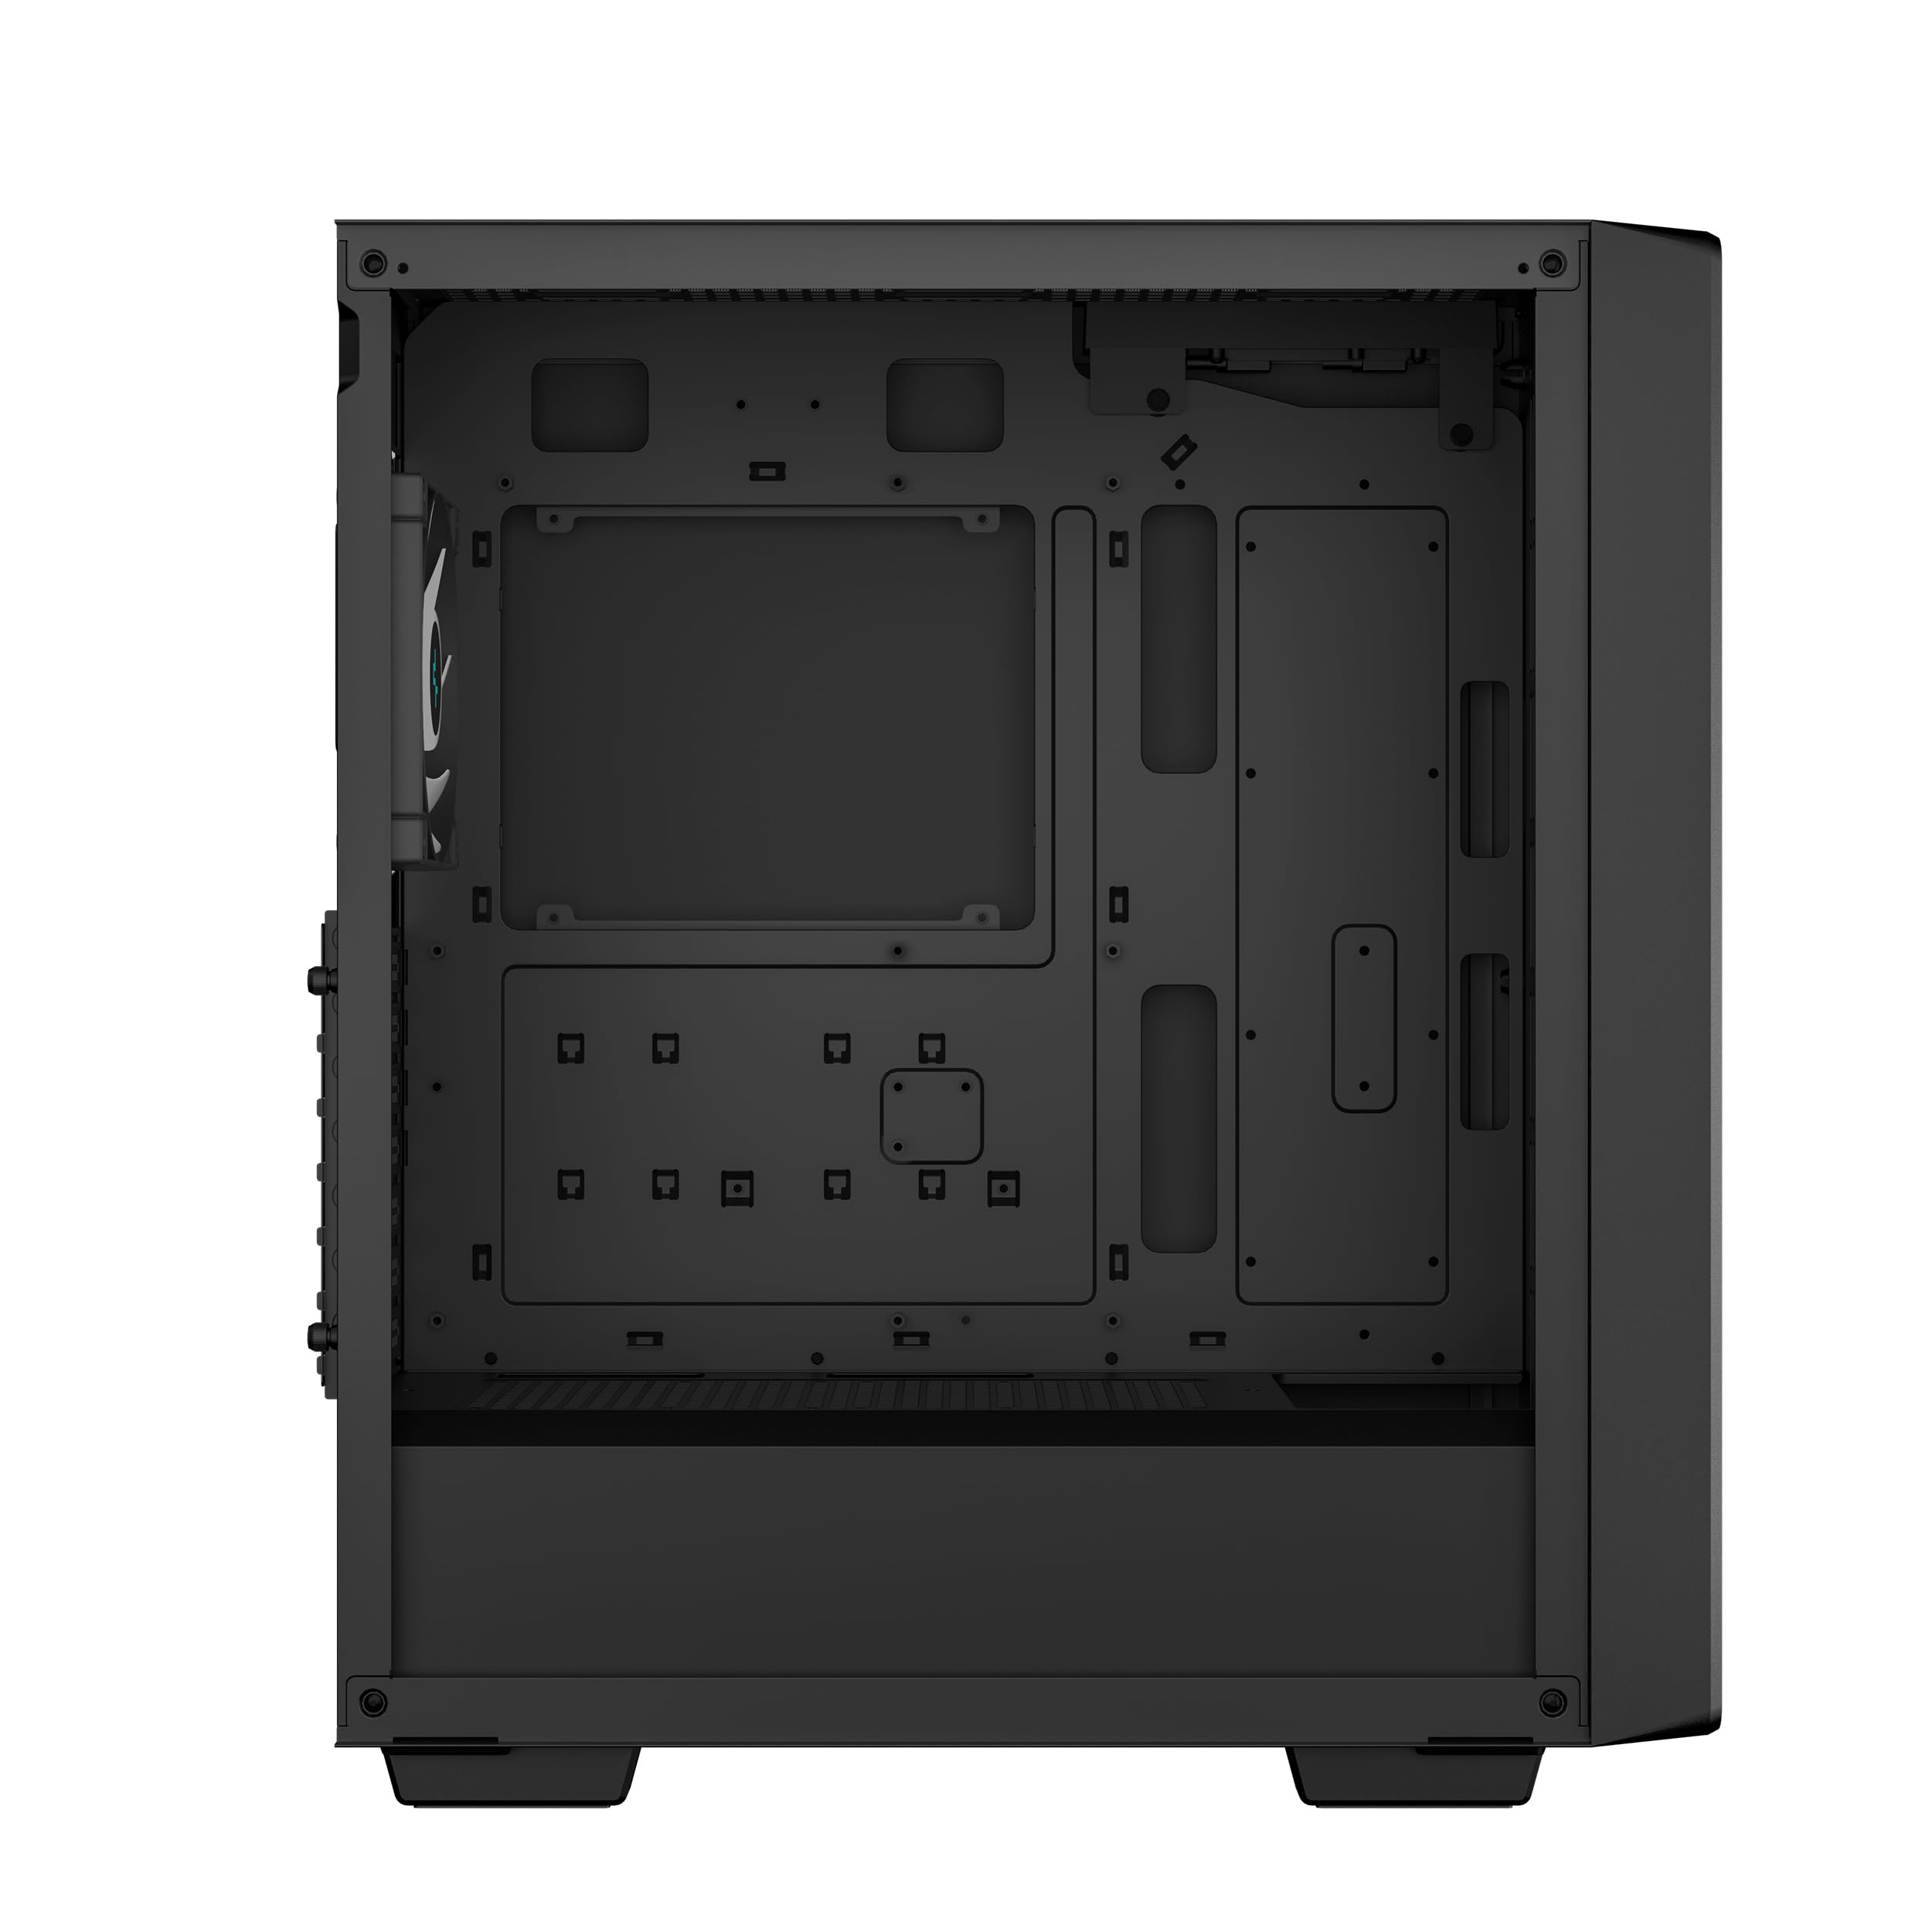 DeepCool CC560 V2 Mid-Tower ATX PC Case, 4X Pre-Installed 120mm LED Fans, Tempered Glass Side Panel, Black